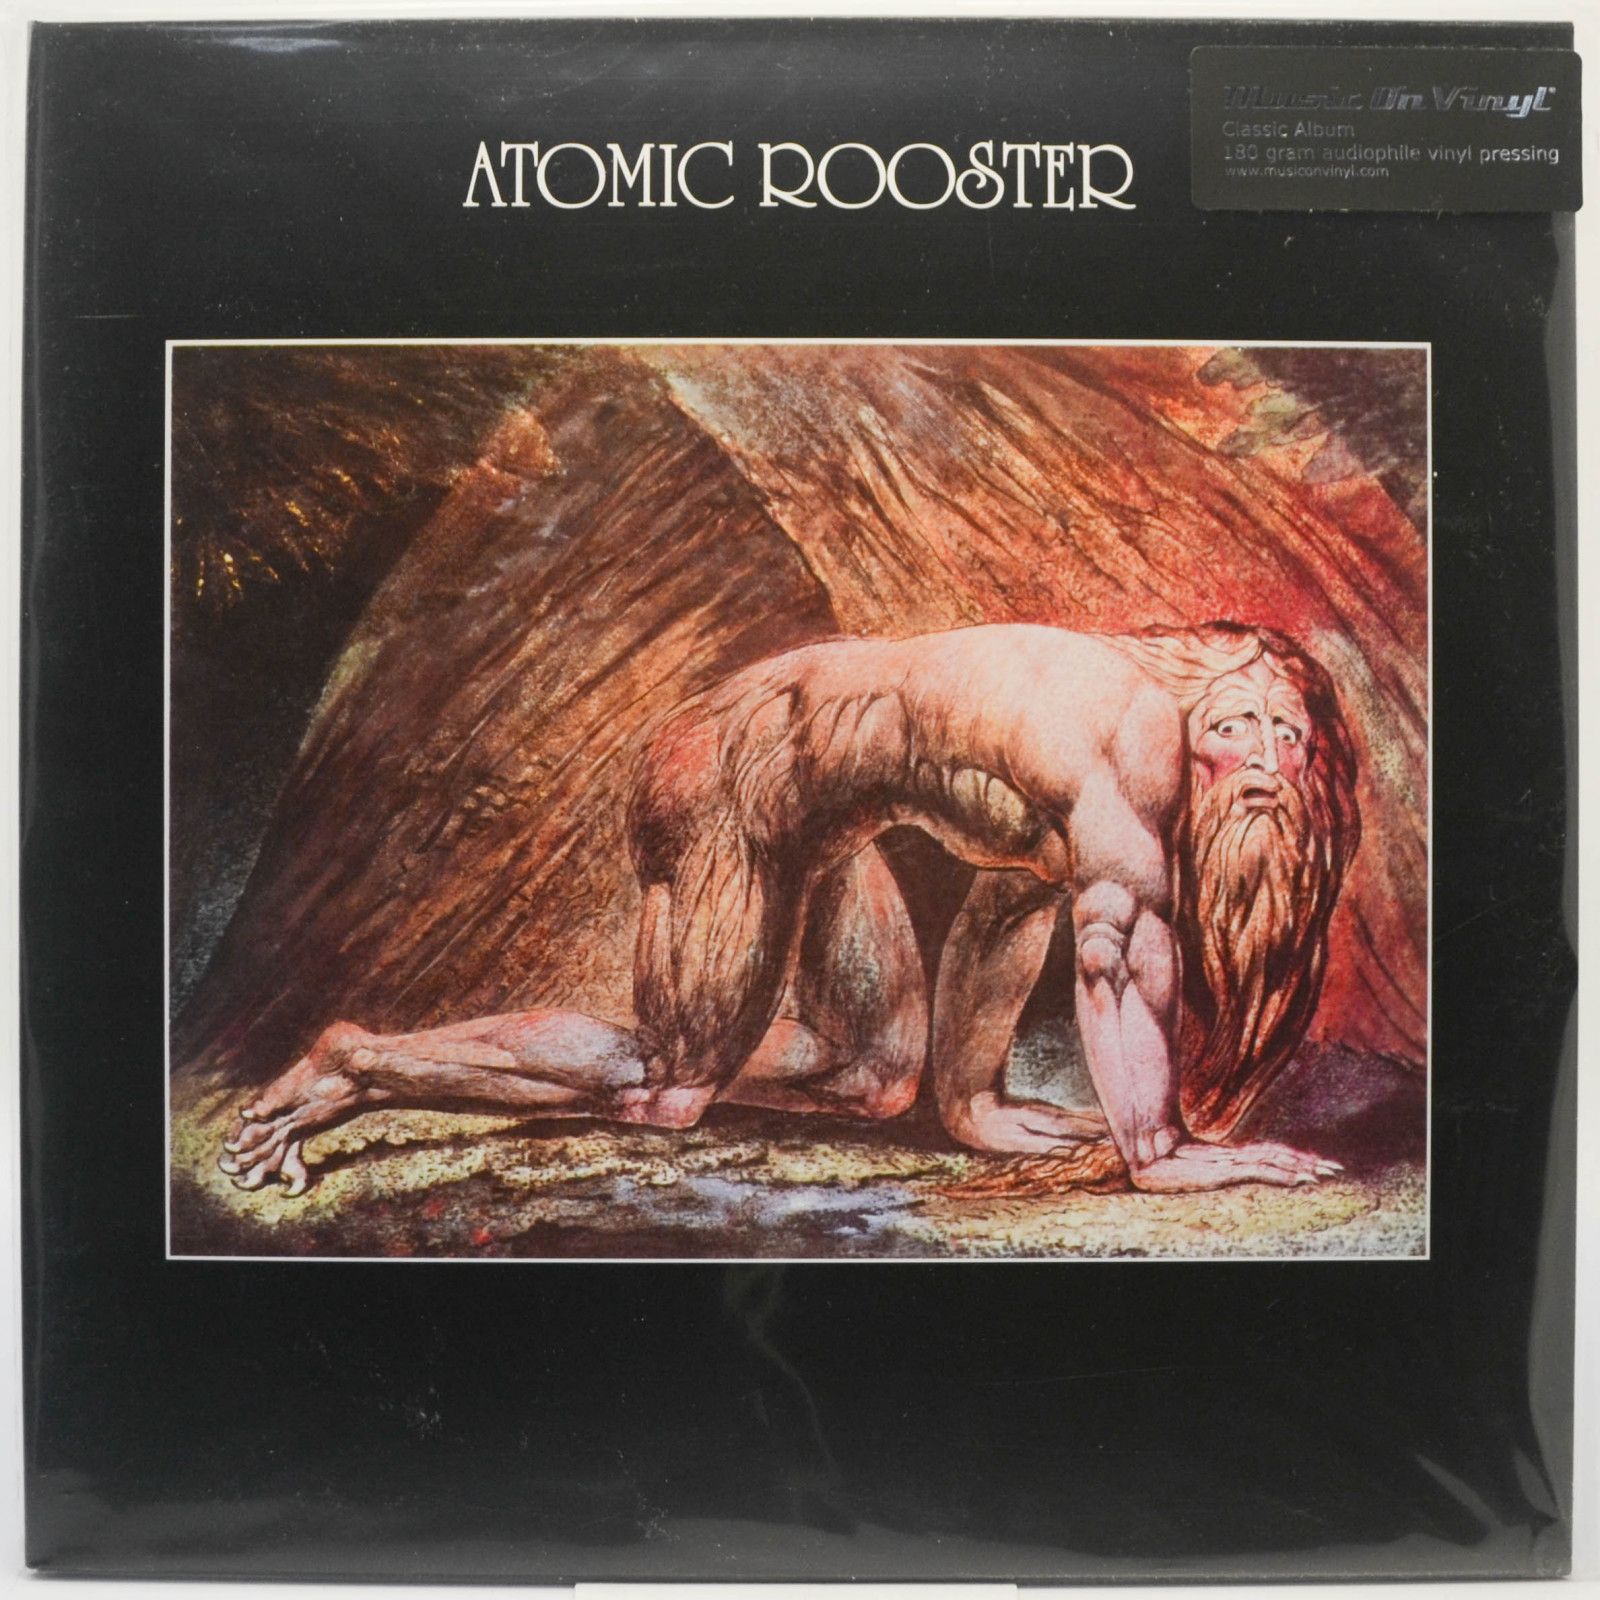 Atomic Rooster — Death Walks Behind You, 1970